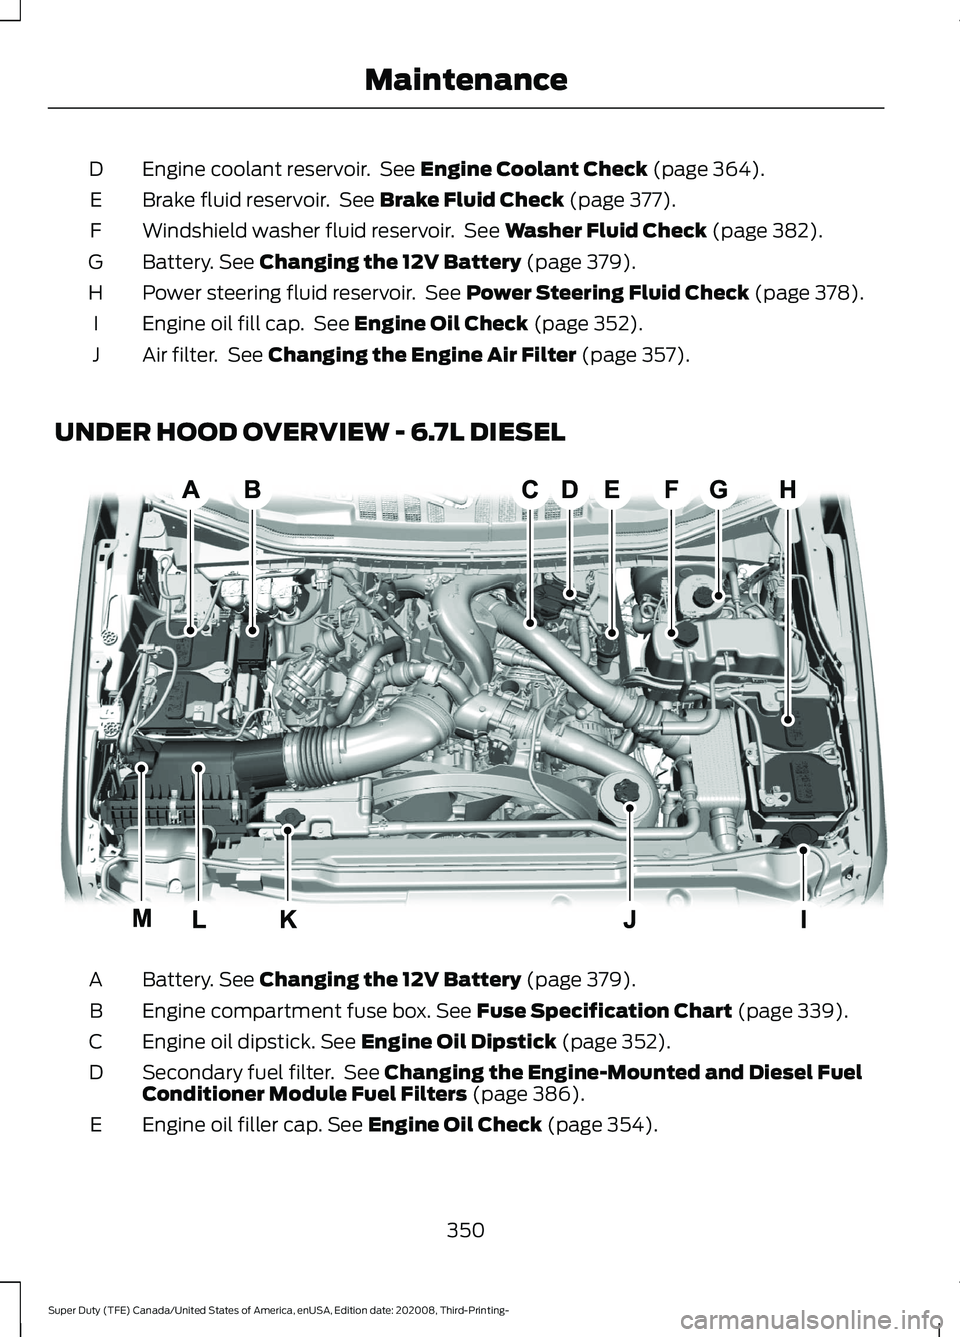 FORD F-450 2021 User Guide Engine coolant reservoir.  See Engine Coolant Check (page 364).
D
Brake fluid reservoir.  See 
Brake Fluid Check (page 377).
E
Windshield washer fluid reservoir.  See 
Washer Fluid Check (page 382).
F